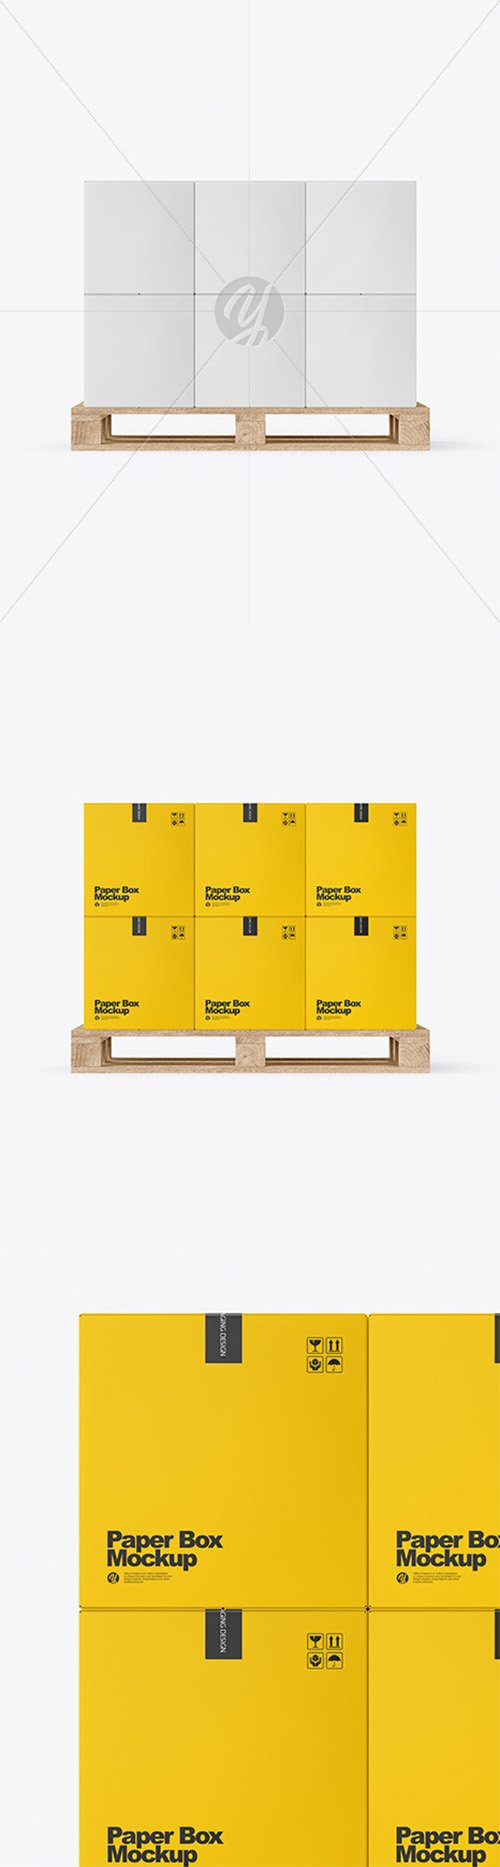 Wooden Pallet With Paper Boxes Mockup 66459 TIF